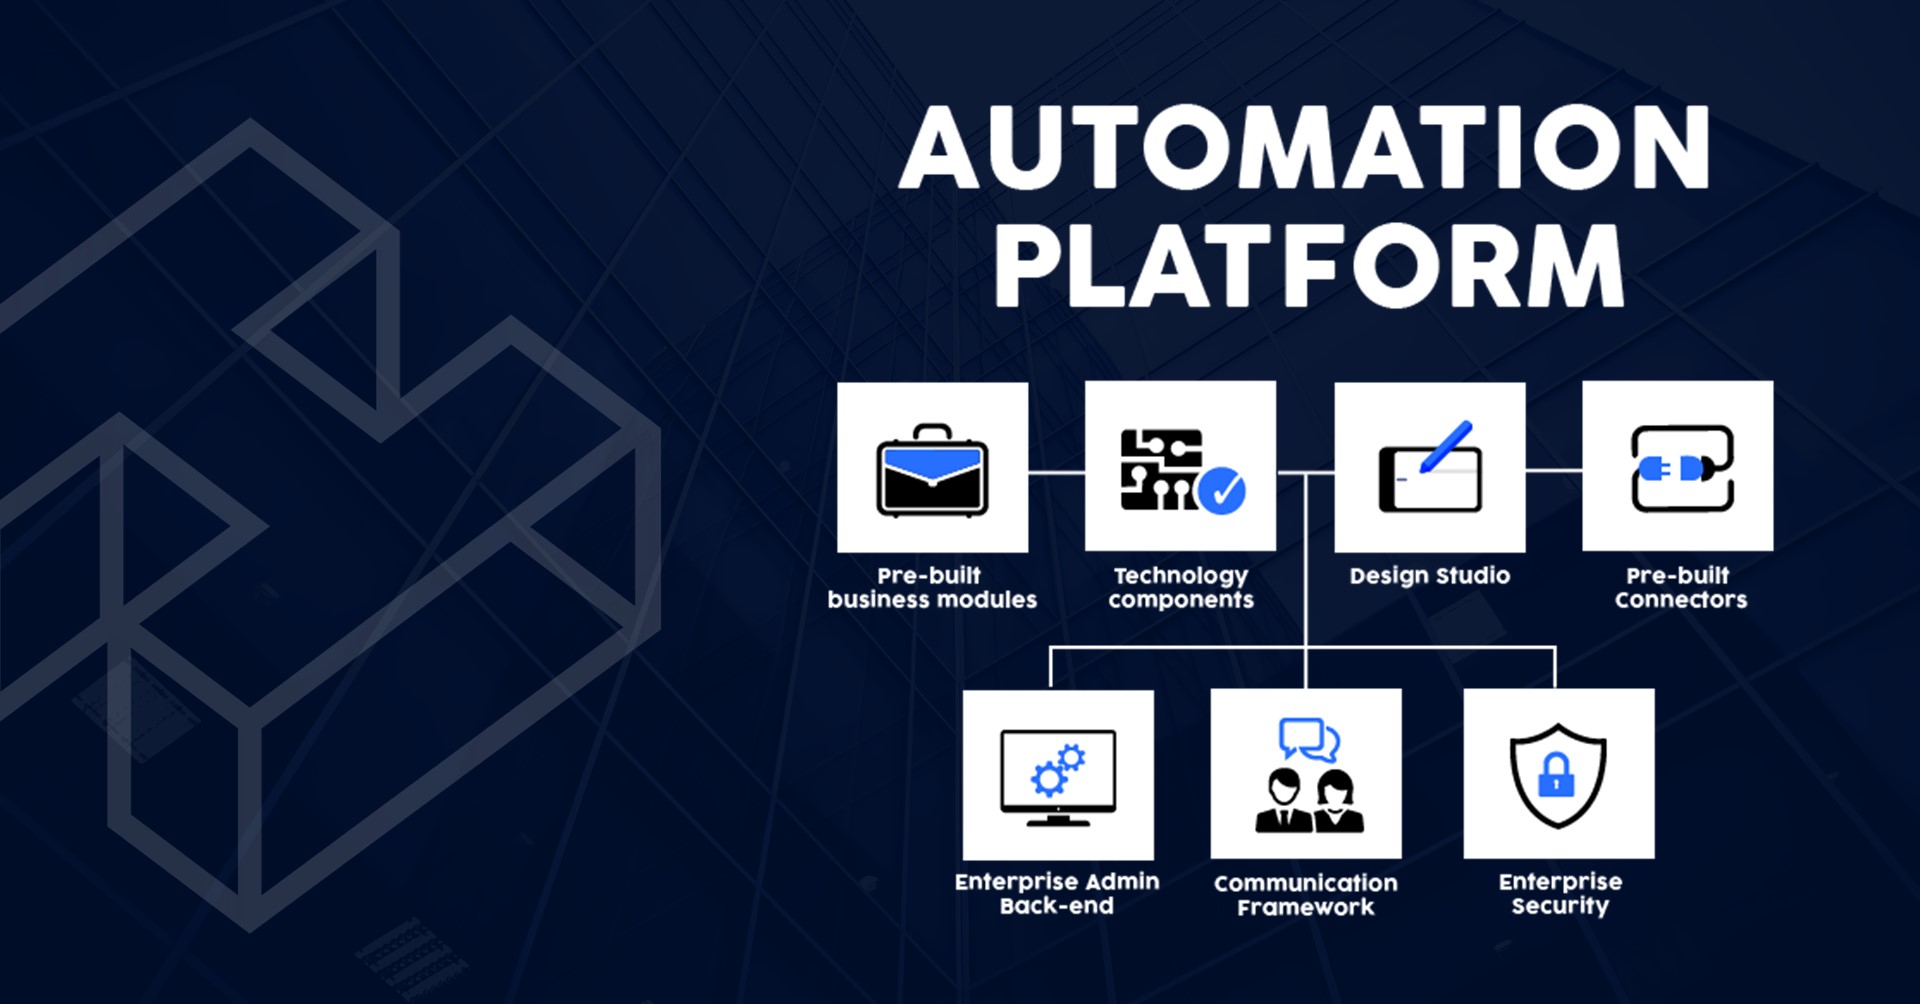 HokuApps Automation Pillars help Deploy Technology Solutions in Weeks